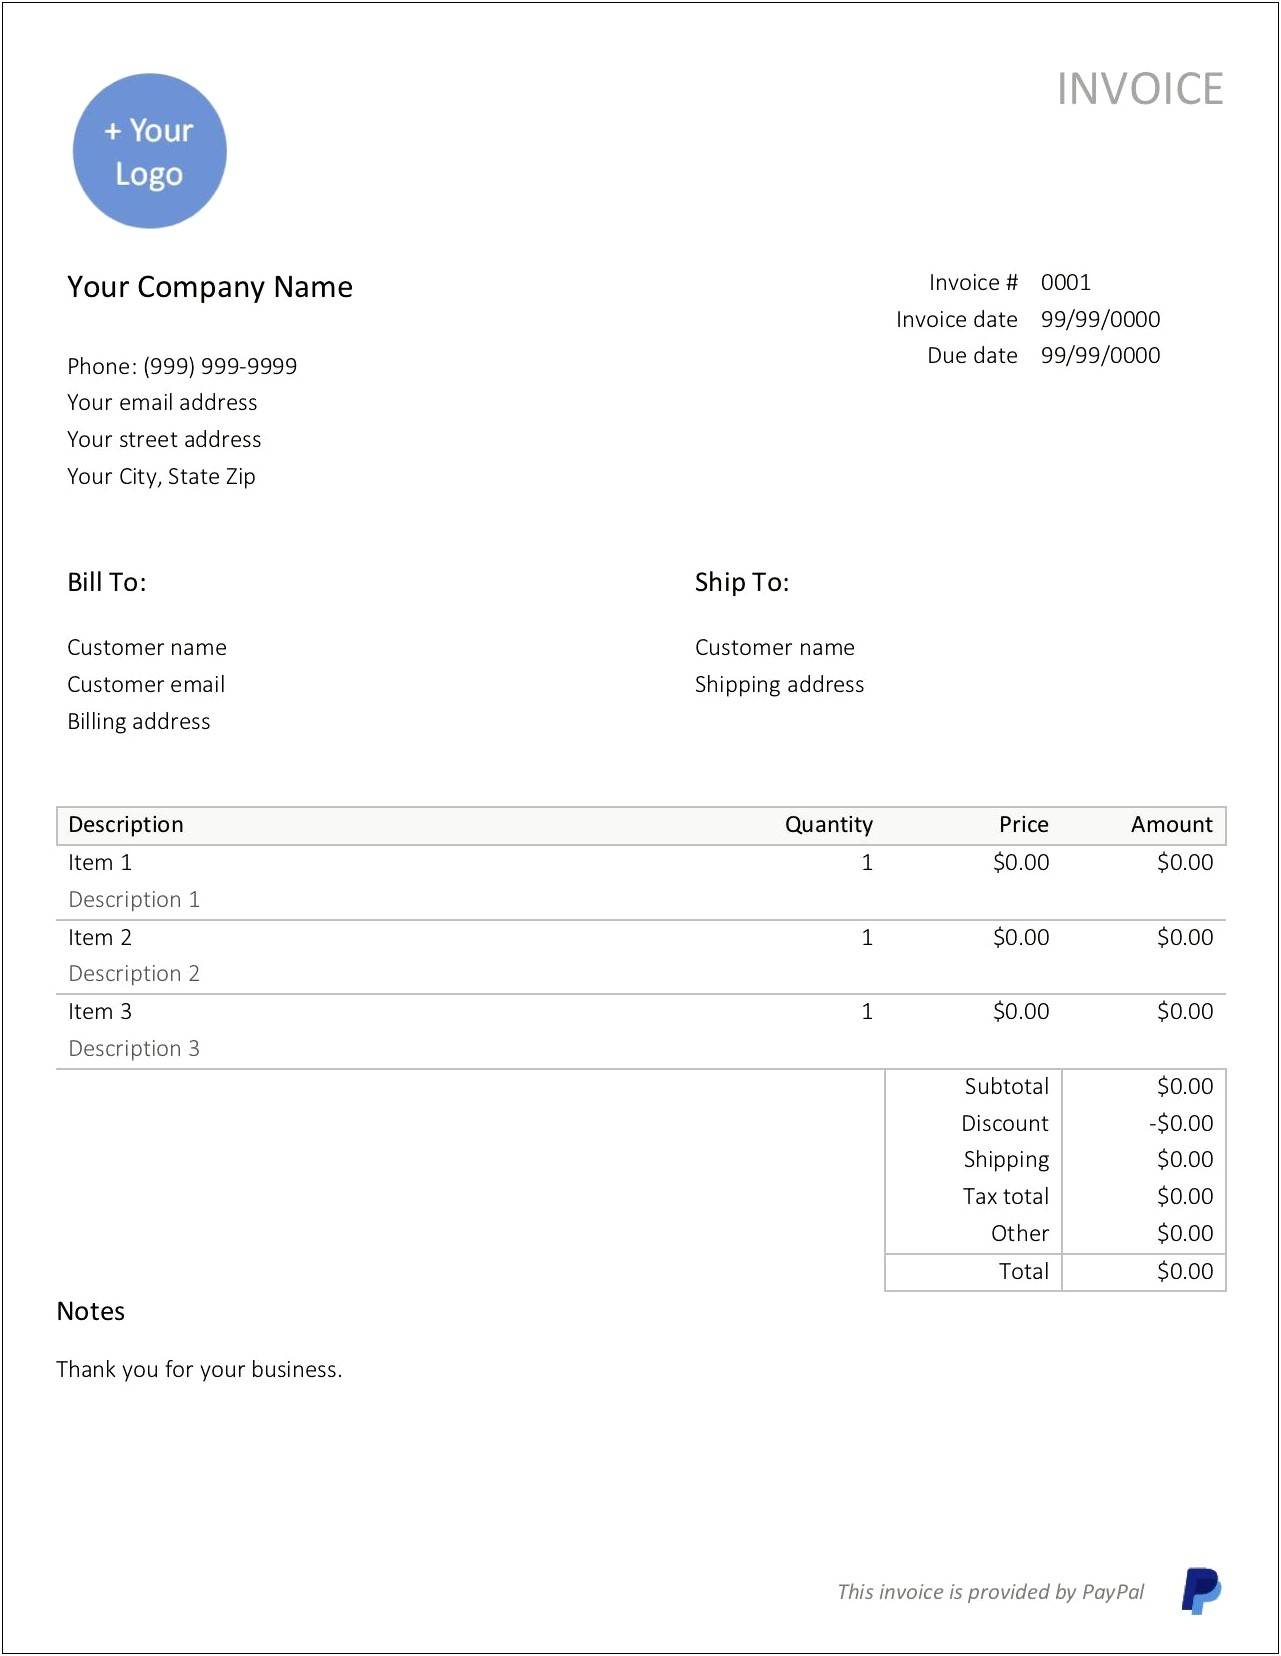 Microsoft Word Provides Templates For Invoice Sheets